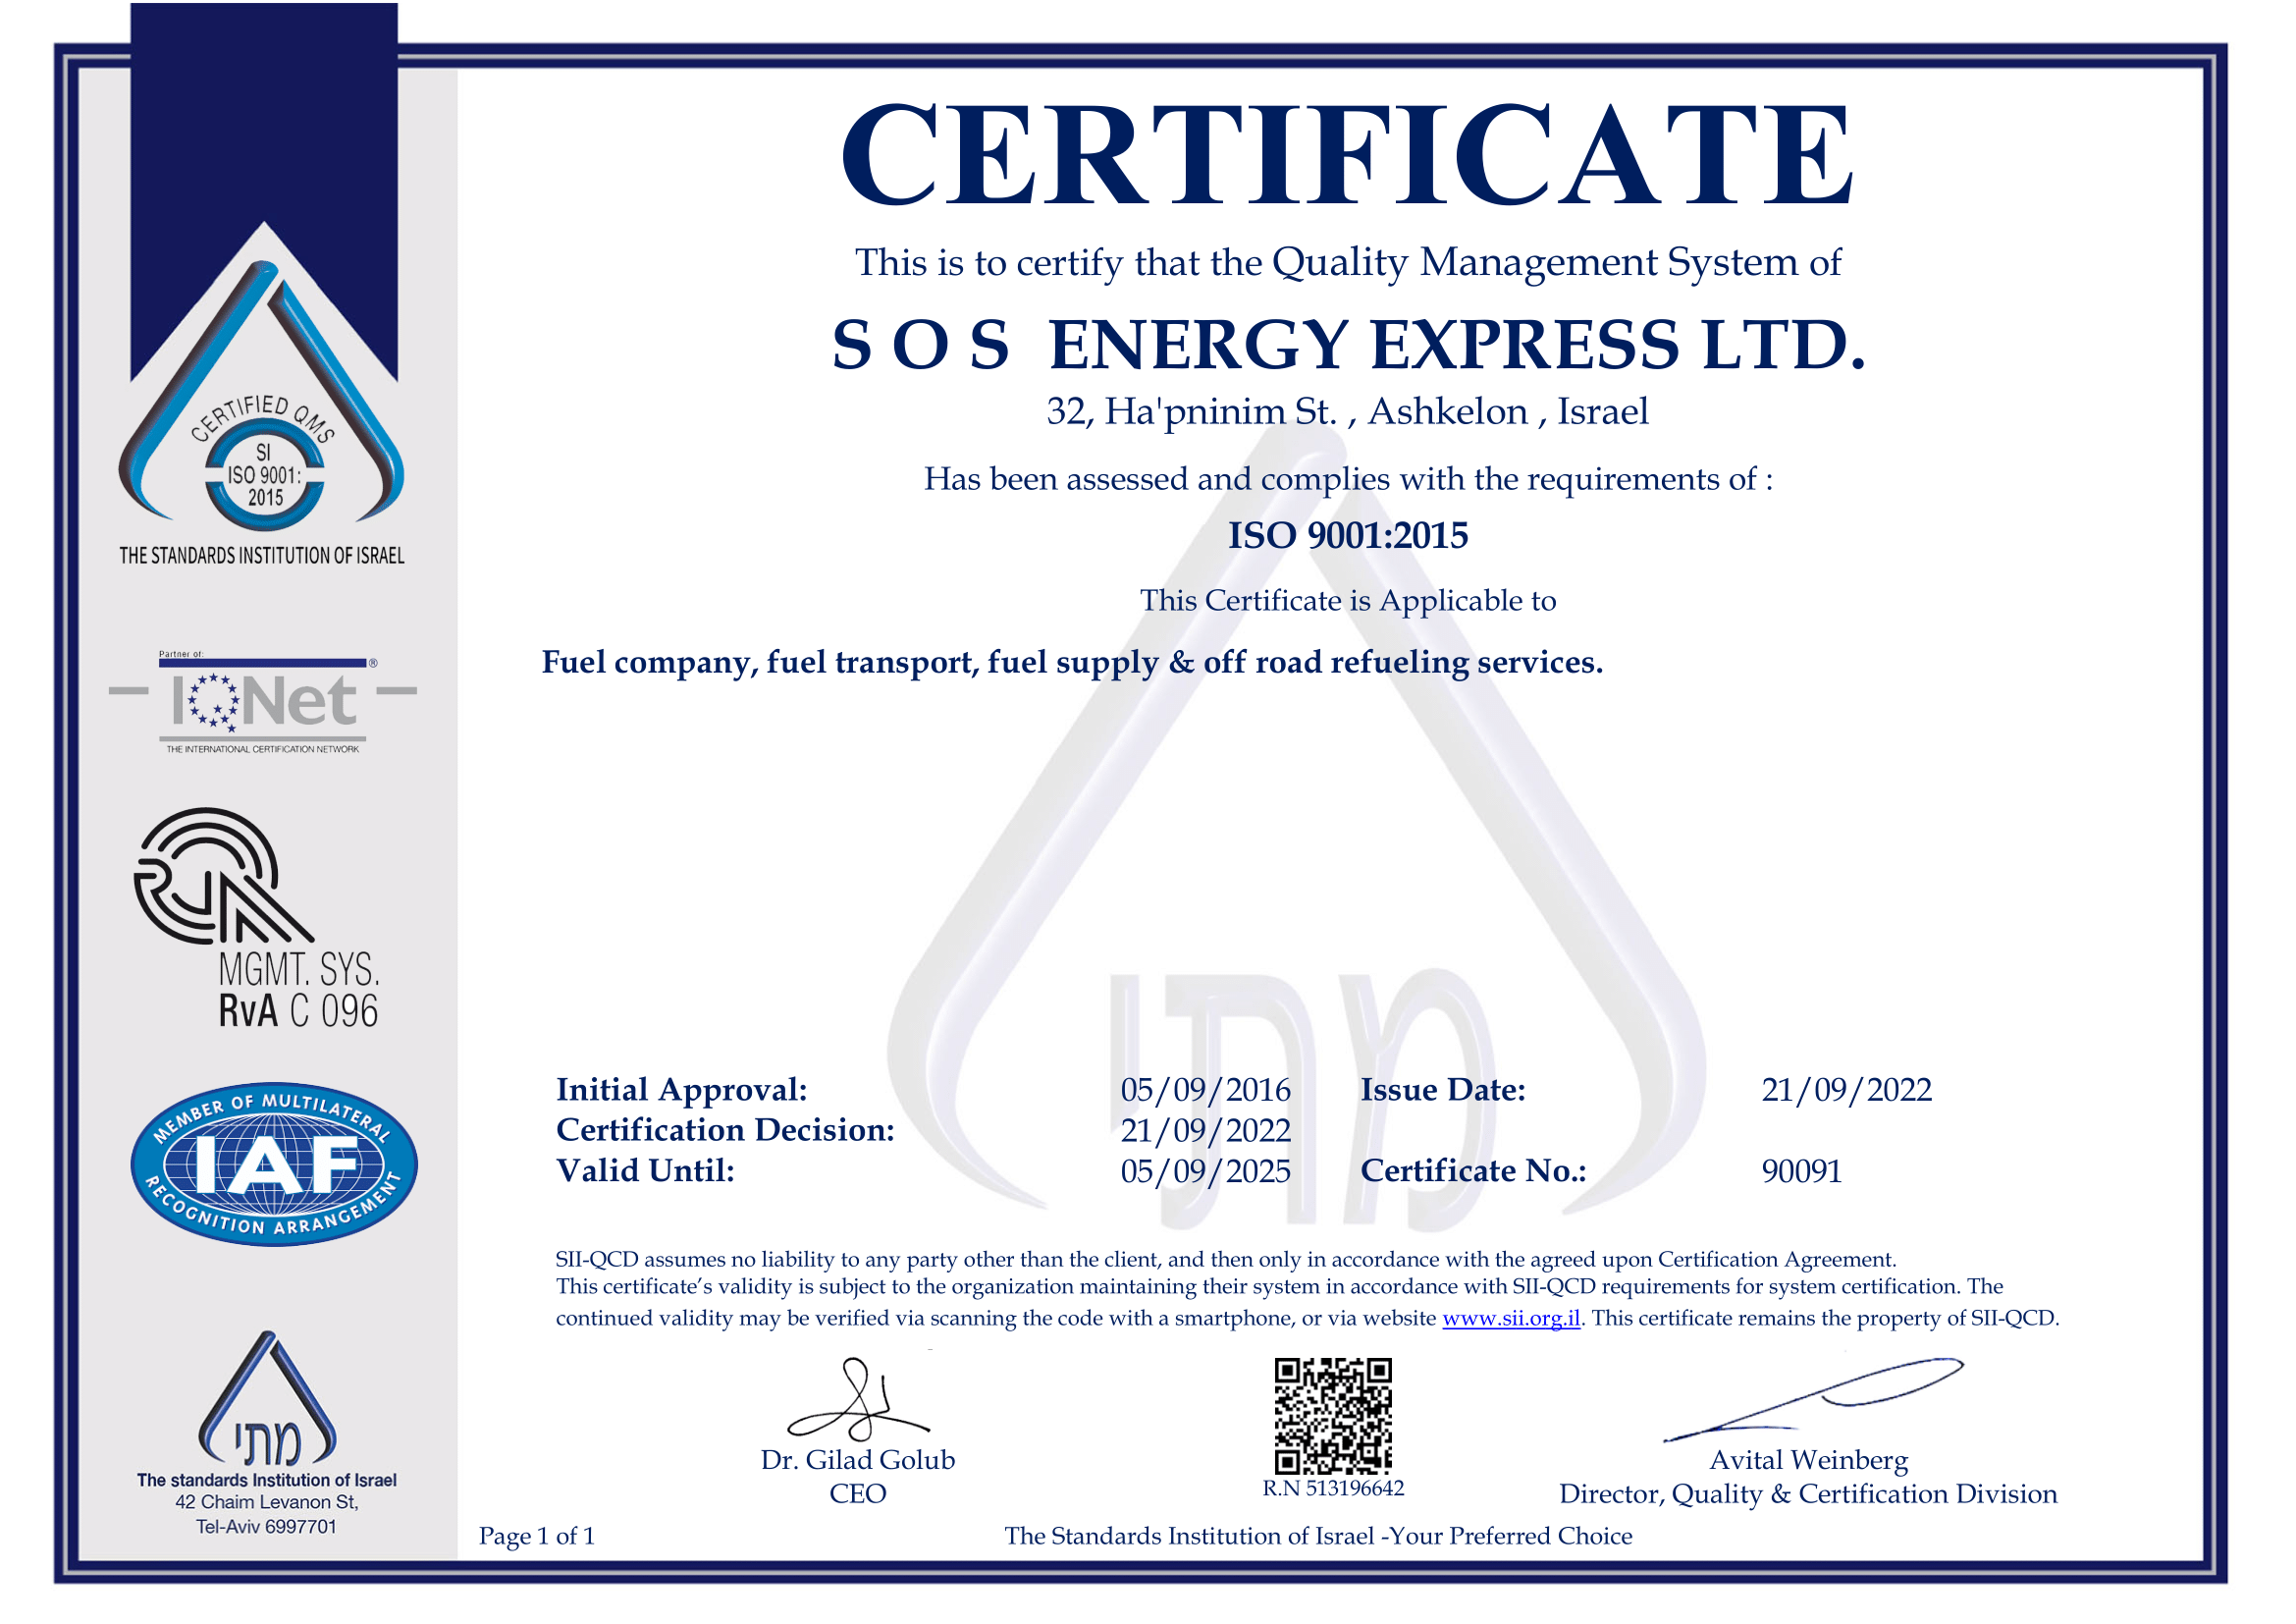 ISO 9001:2015 / 3